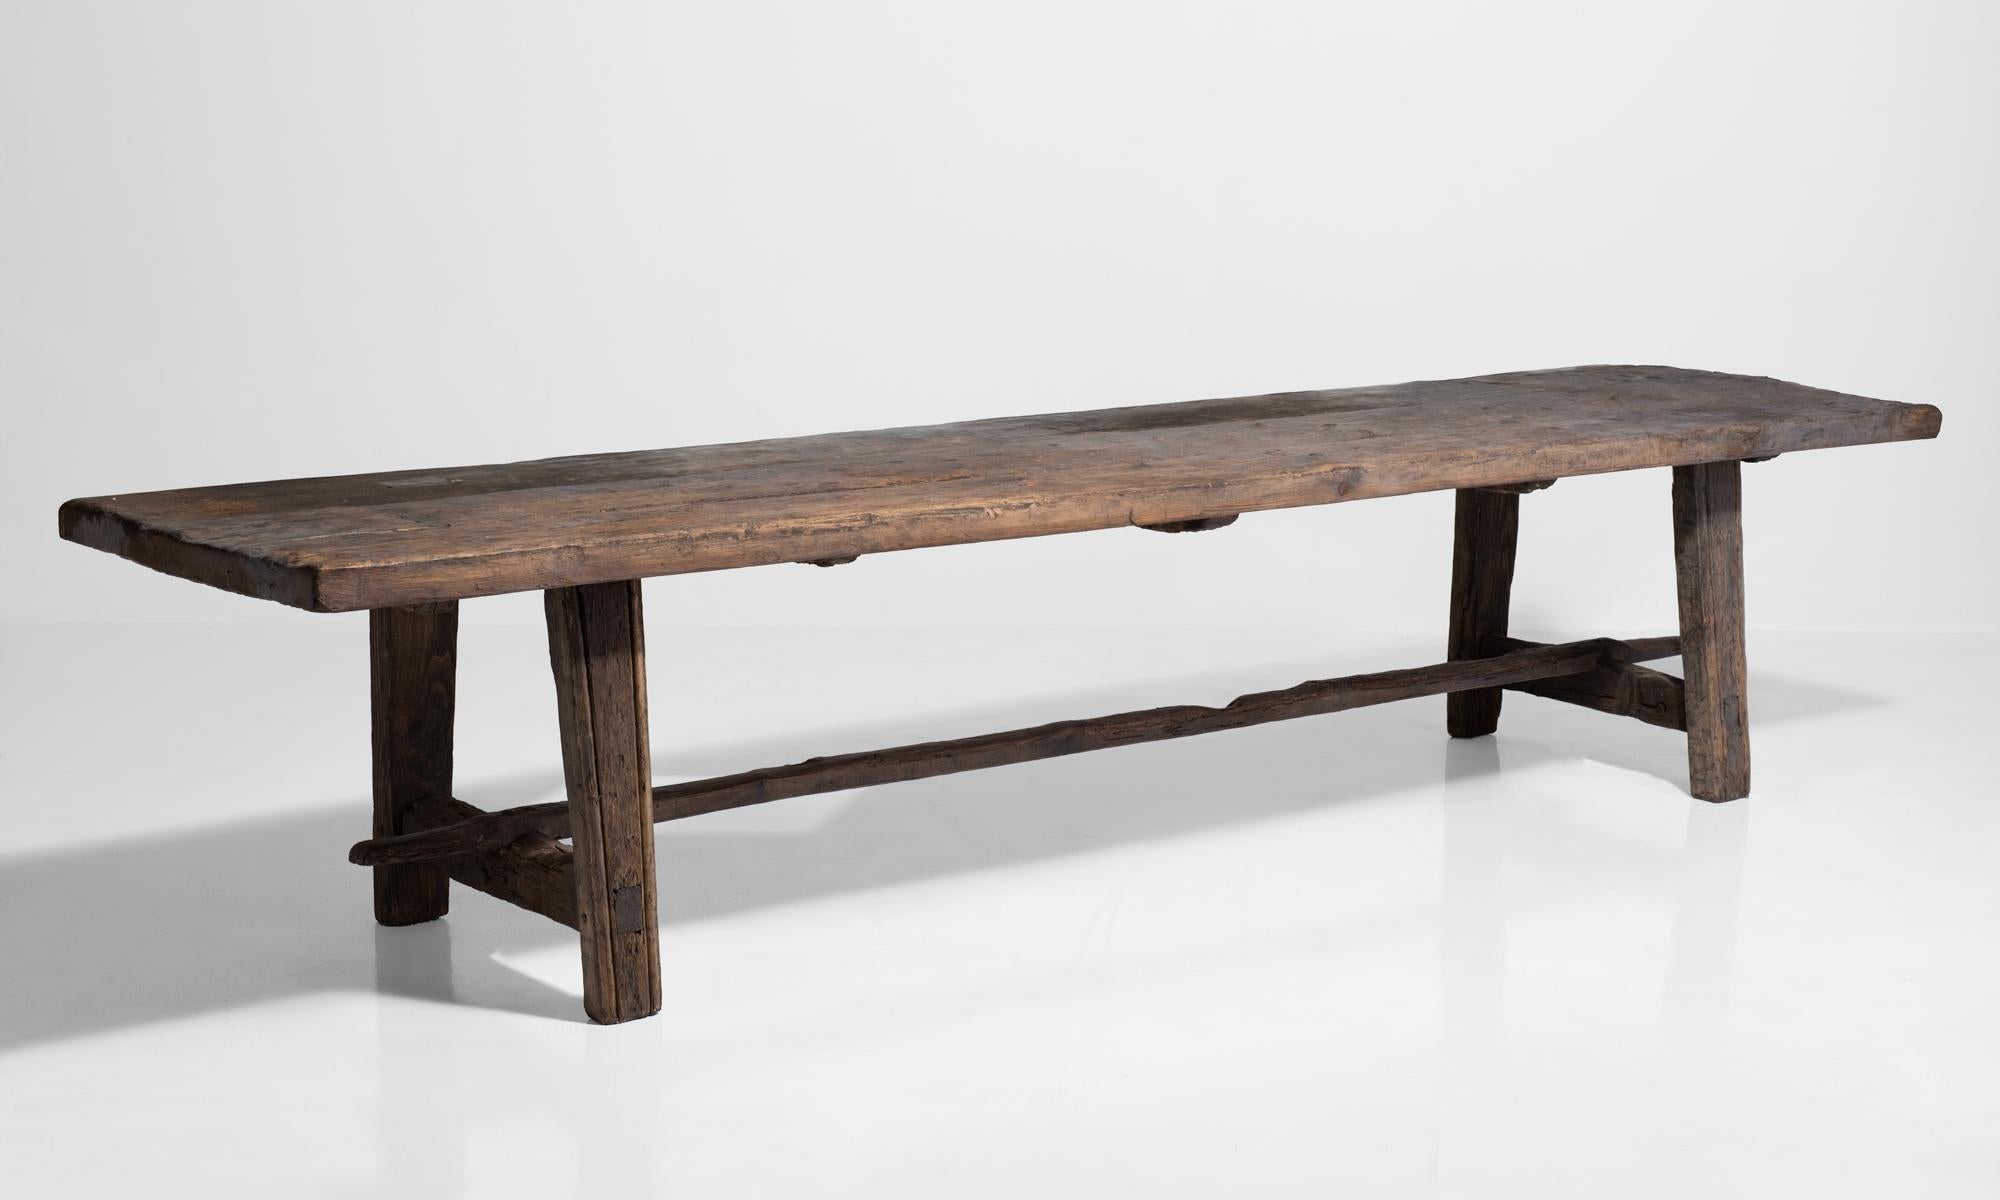 Beautifully aged table constructed of pine, with minimal detailing.